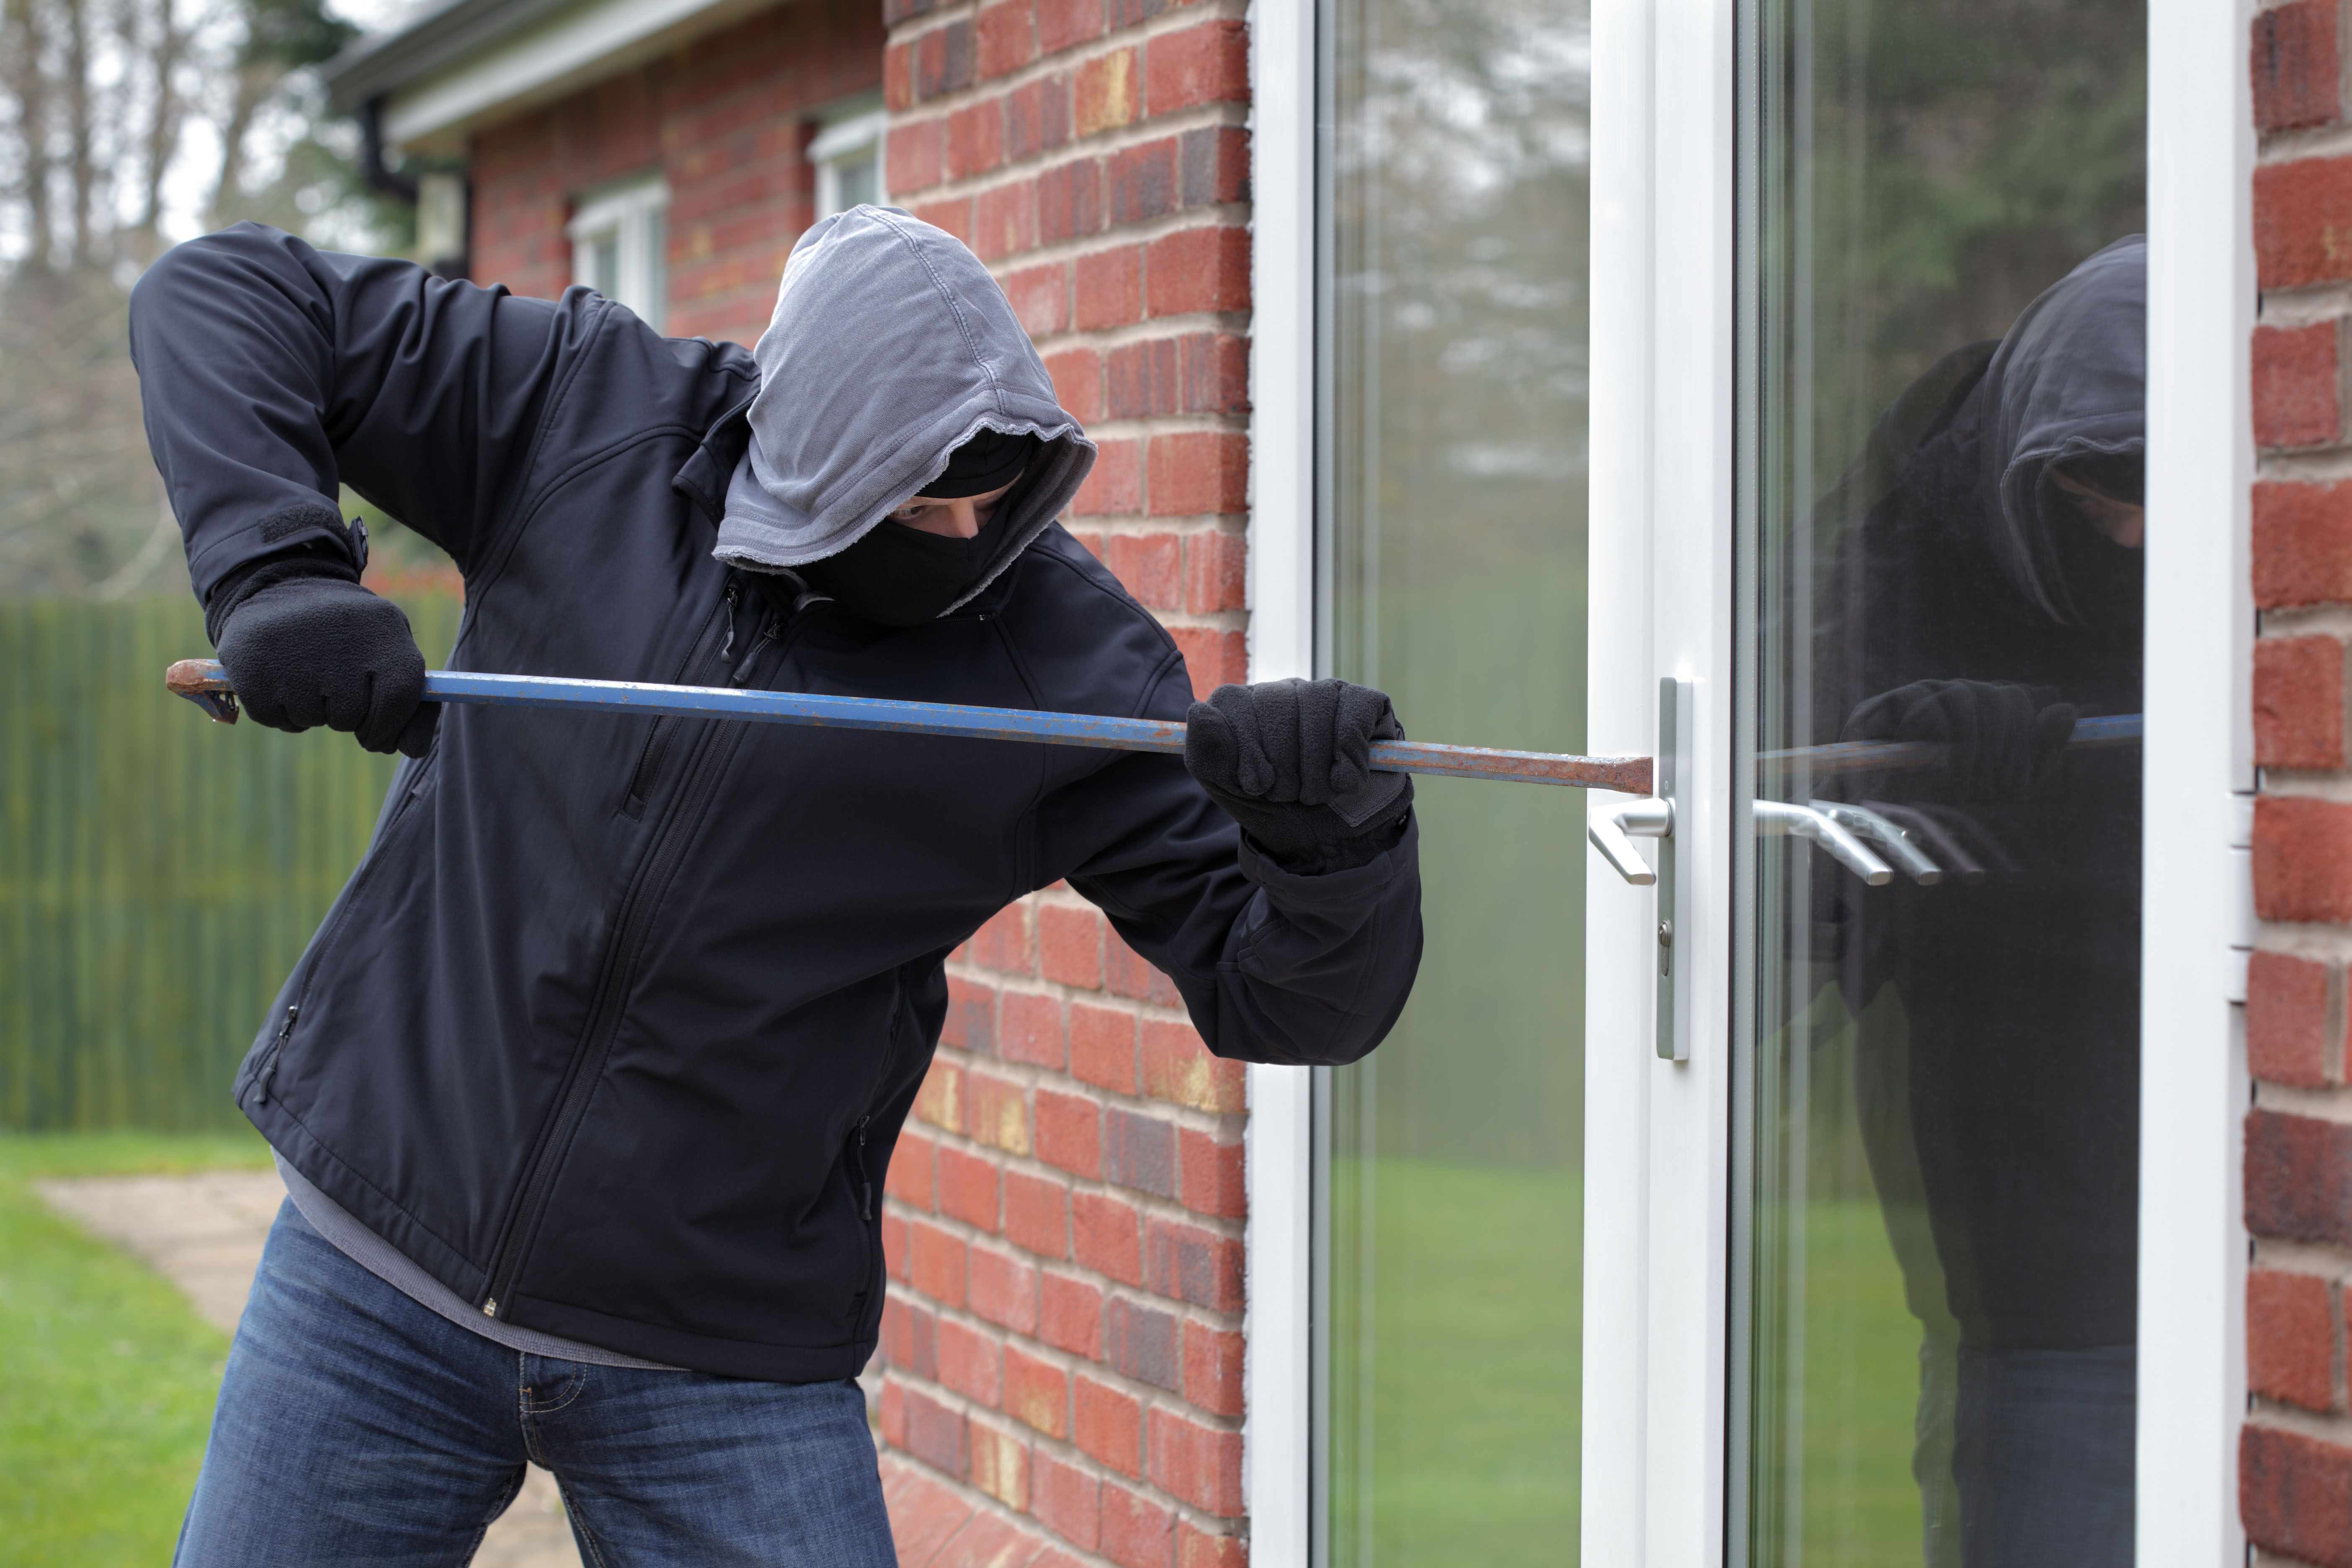 Police will prioritise cases where people's homes have been burgled, rather than shed break-ins.